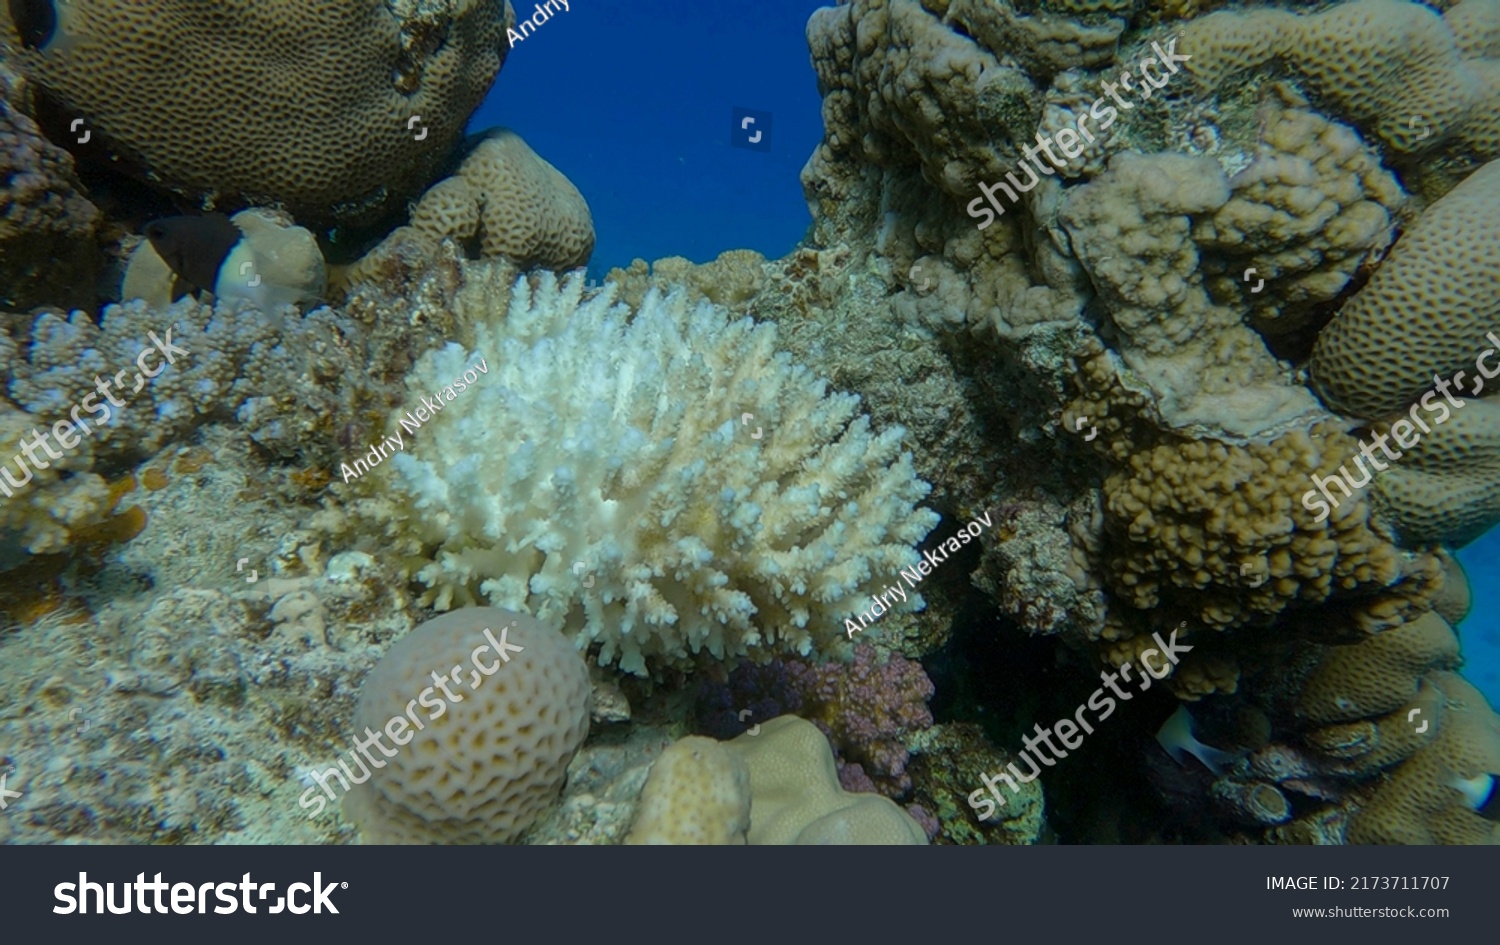 Bleaching Death Corals Excessive Seawater Heating Stock Photo ...